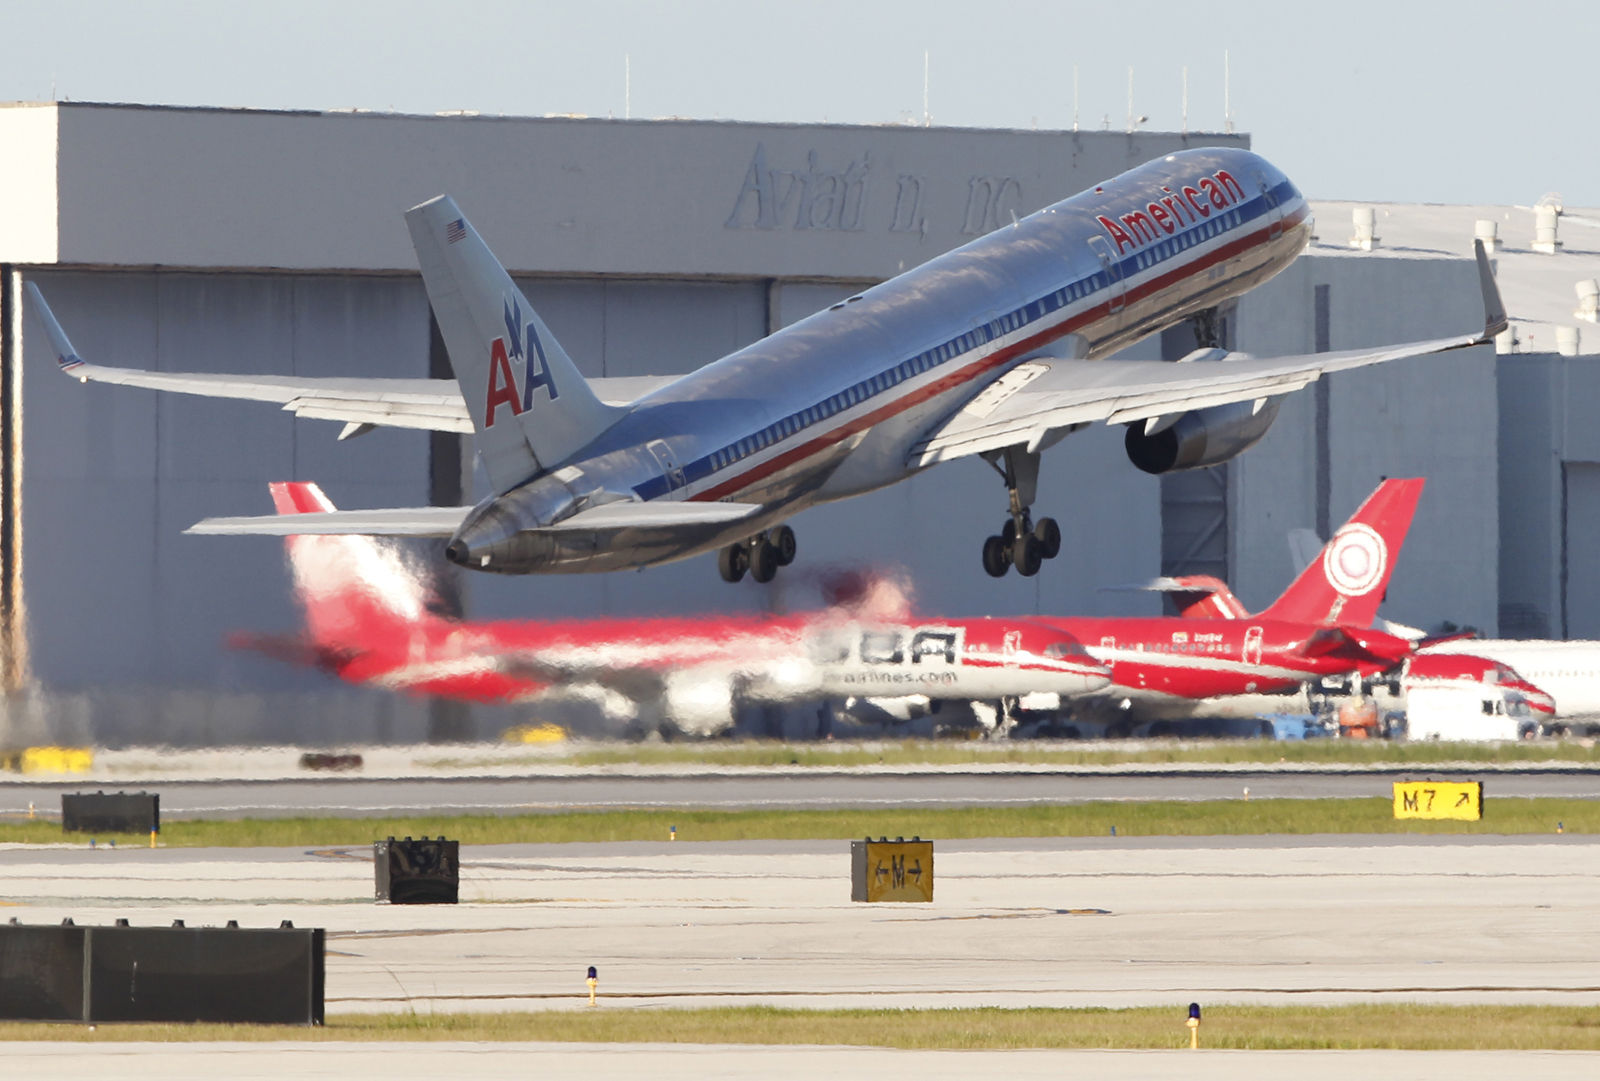 American Airlines came in sixth in the 2017 rankings. The airline came in fourth in on-time arrivals but scored poorly with cancelled flights and two-hour tarmac delays. File. (AP Photo/Wilfredo Lee)